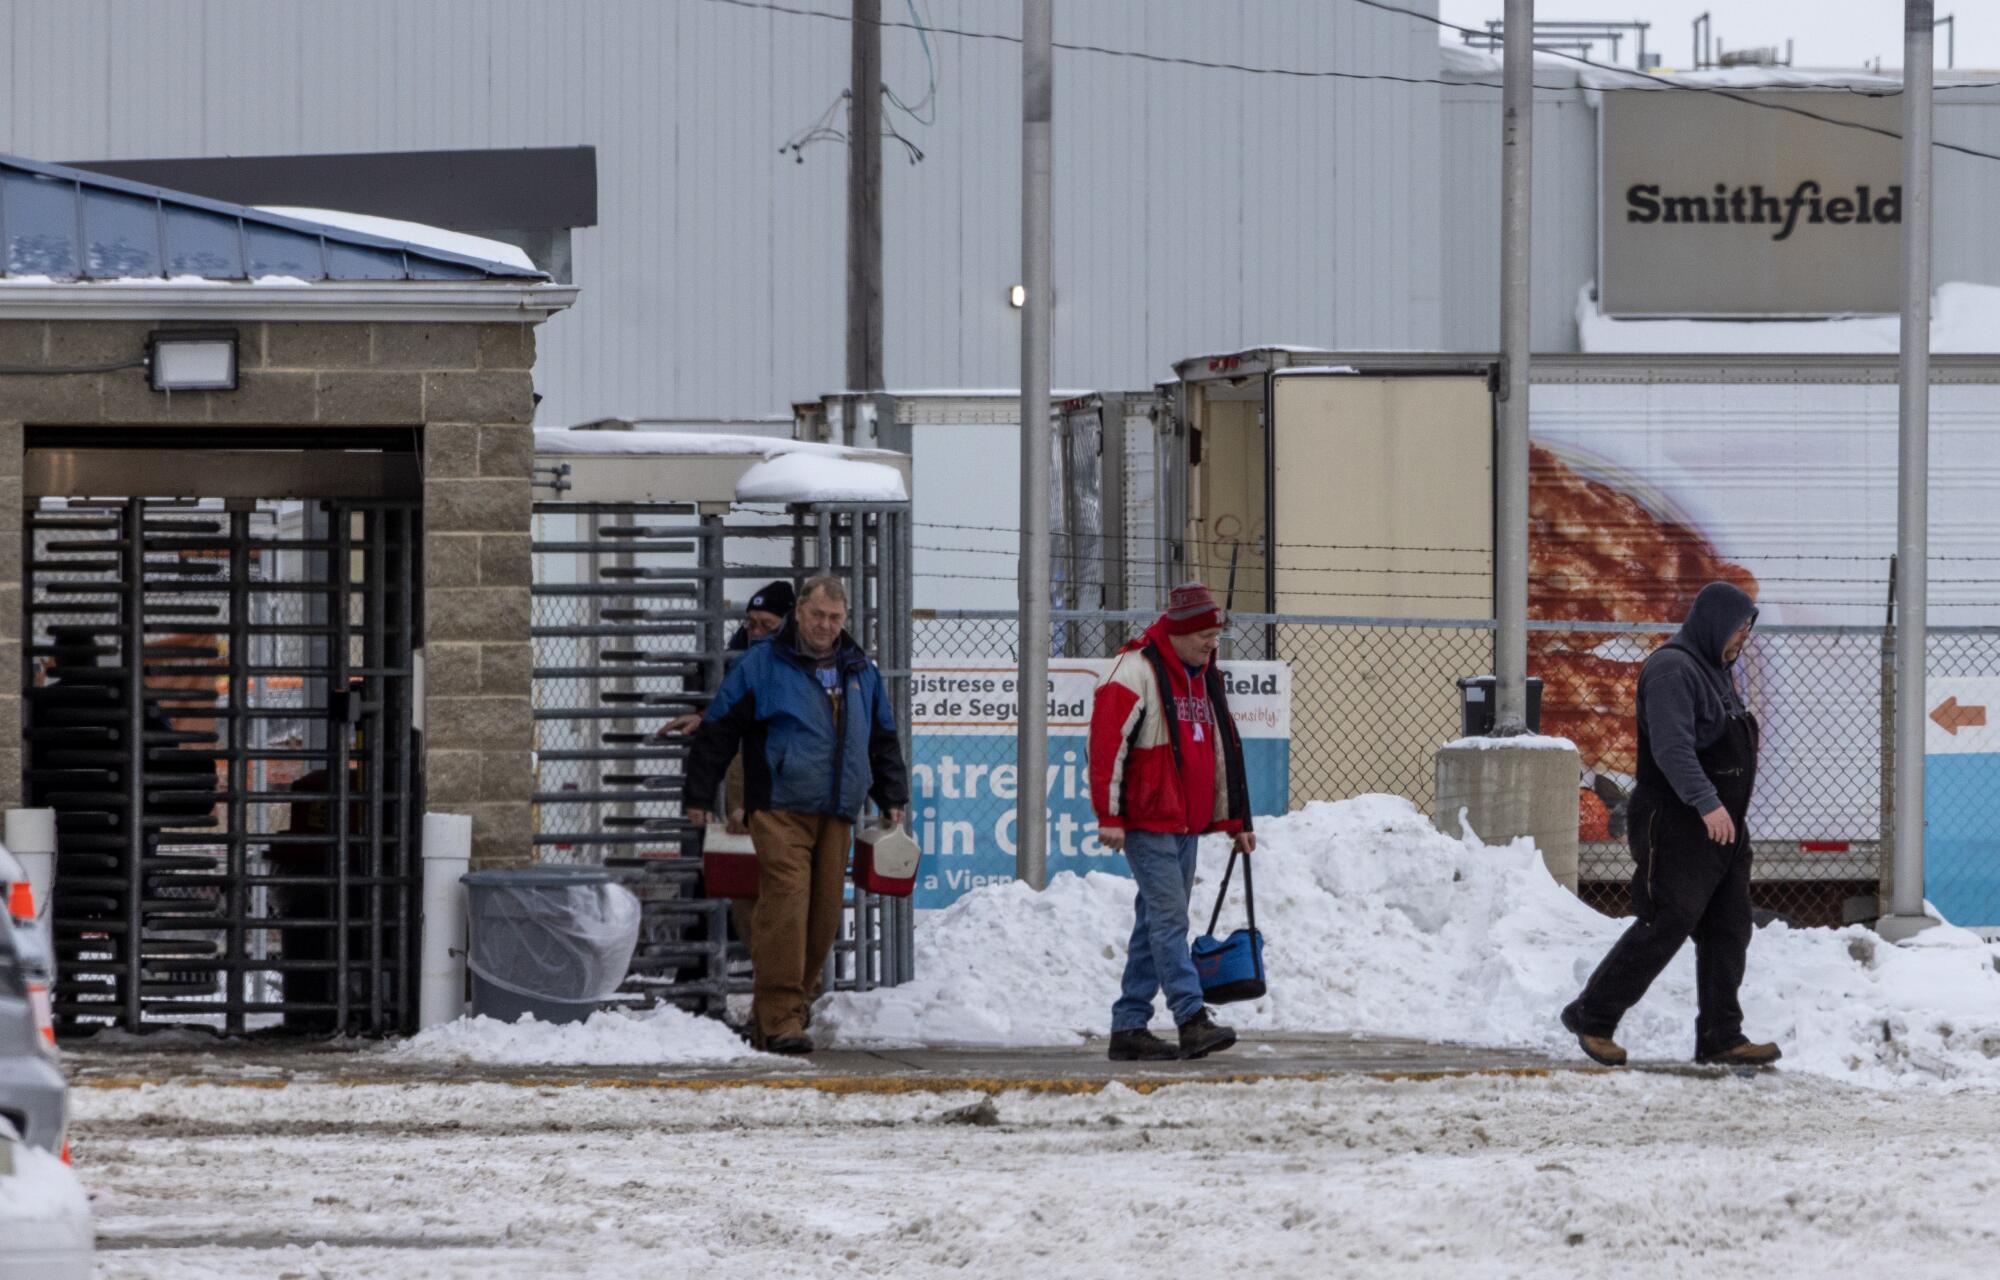 Workers leave after their shift at Smithfield meatpacking plant in Denison, Iowa. 